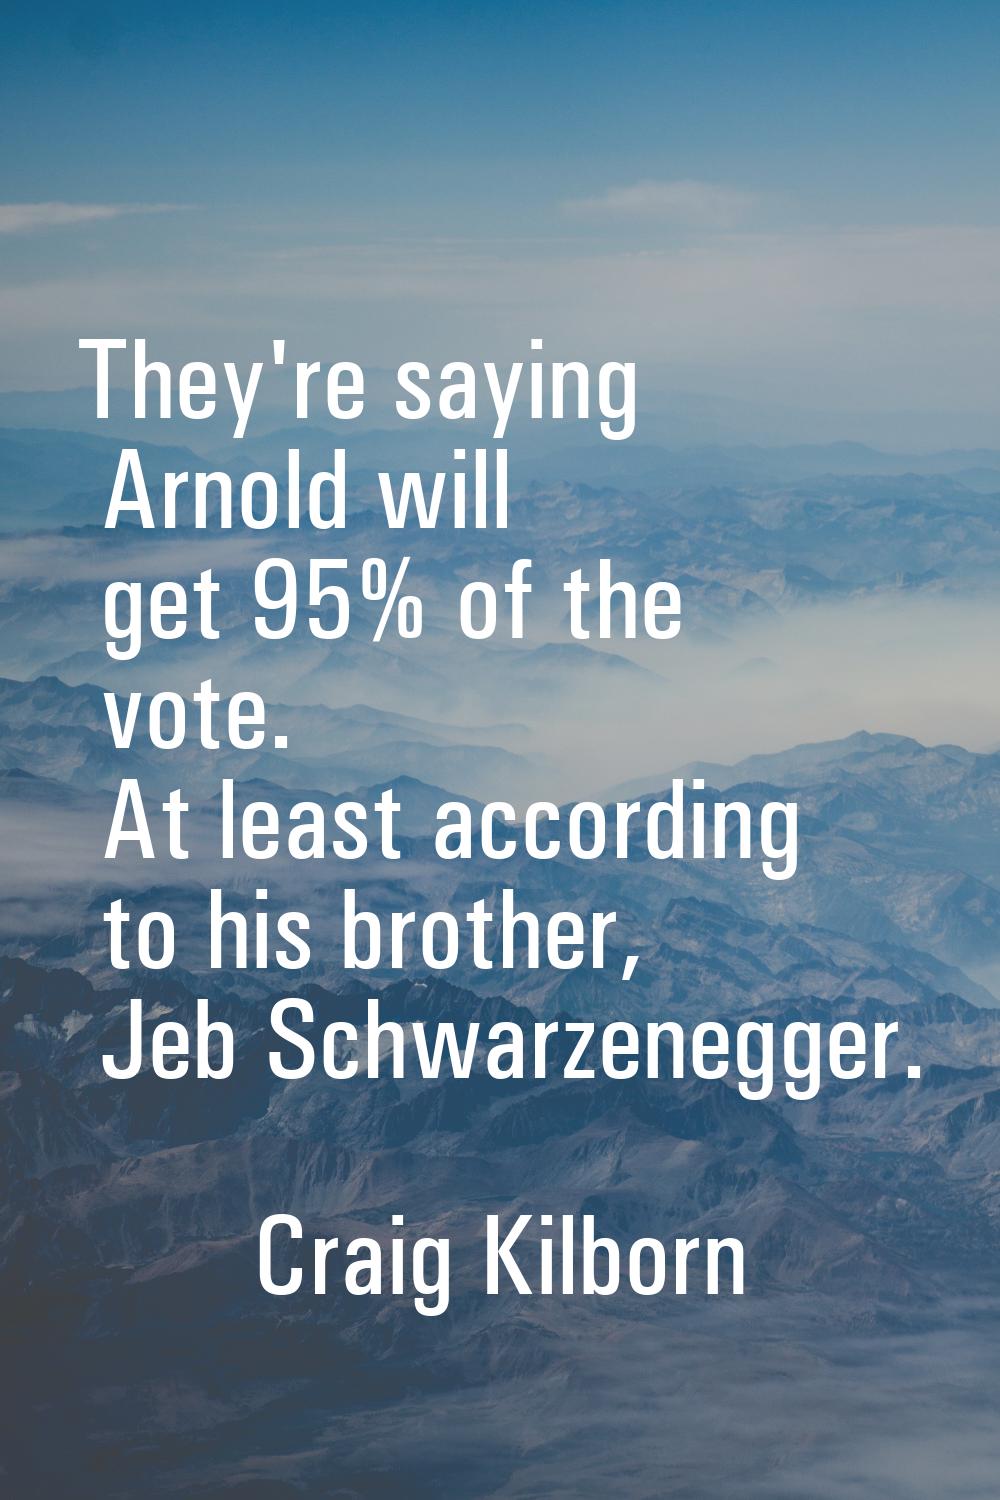 They're saying Arnold will get 95% of the vote. At least according to his brother, Jeb Schwarzenegg